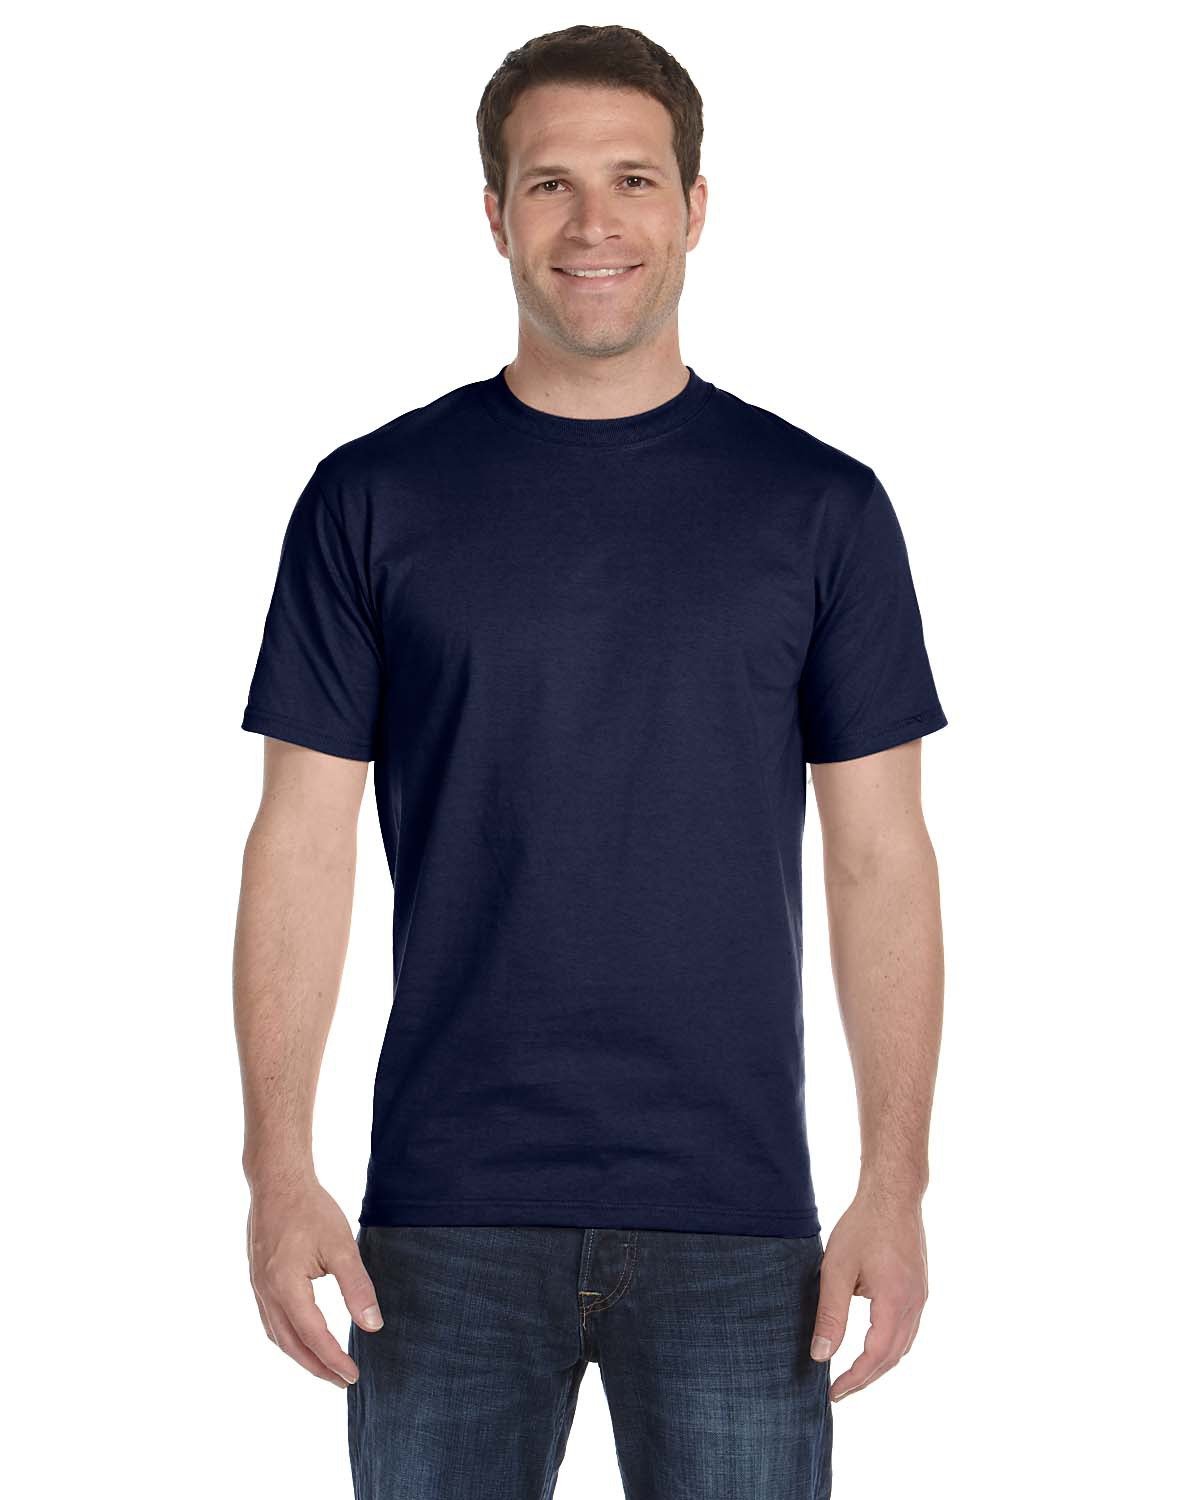 INTRODUCING-HANES-MENS-TALL-BEEFY-TÂ®-UNMATCHED-COMFORT-AND-QUALITY-FOR-TALLER-INDIVIDUALS